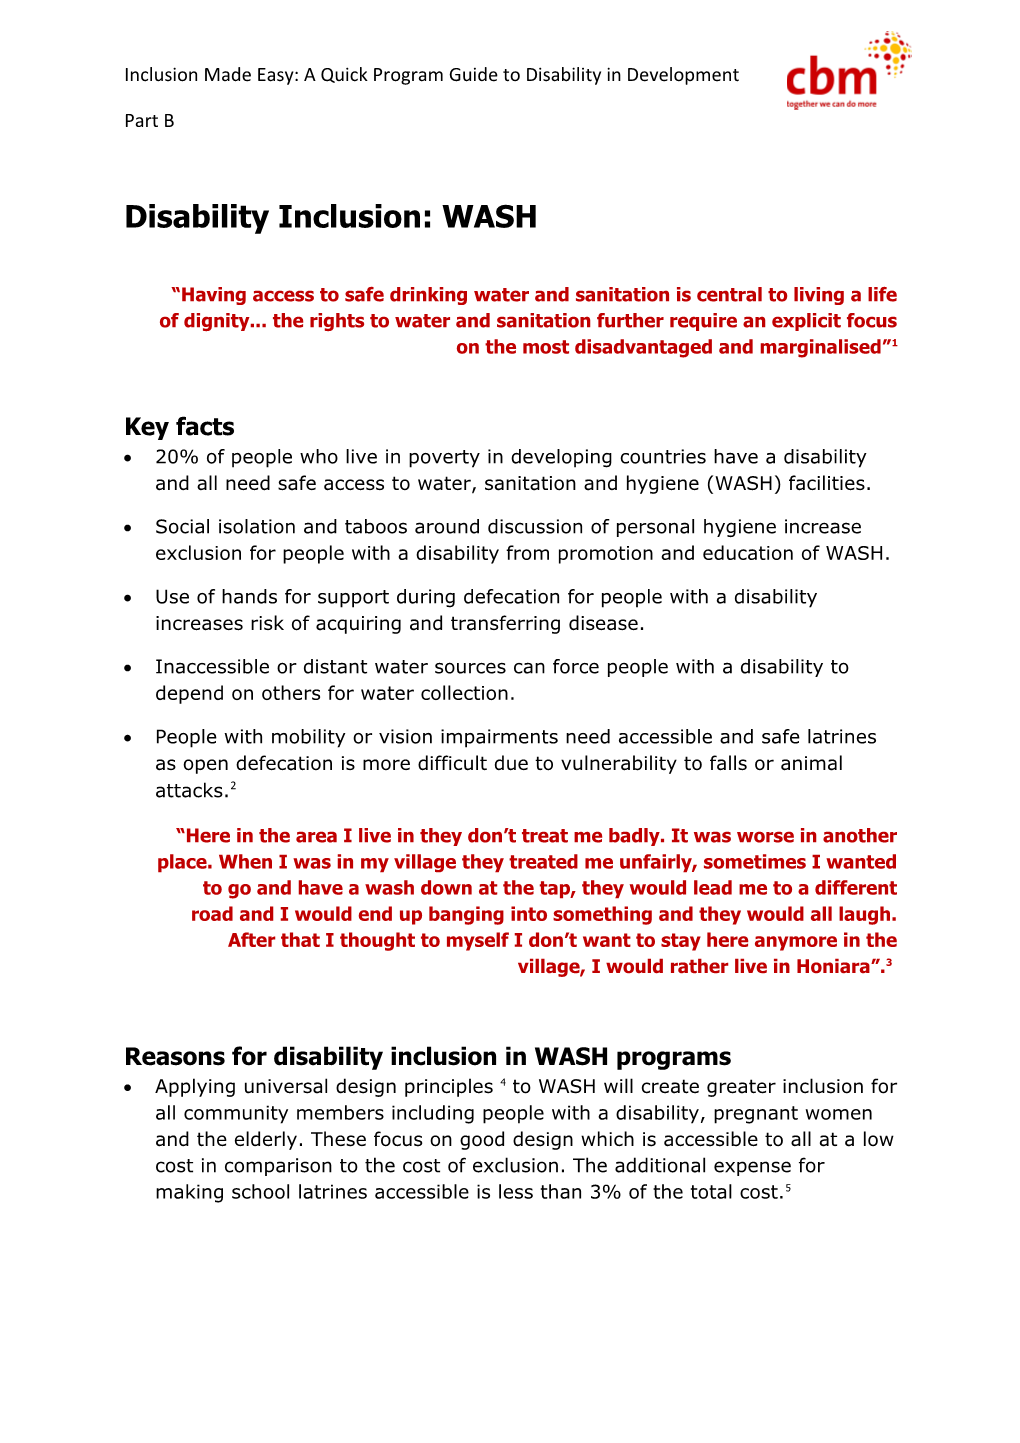 Disability Inclusion: WASH